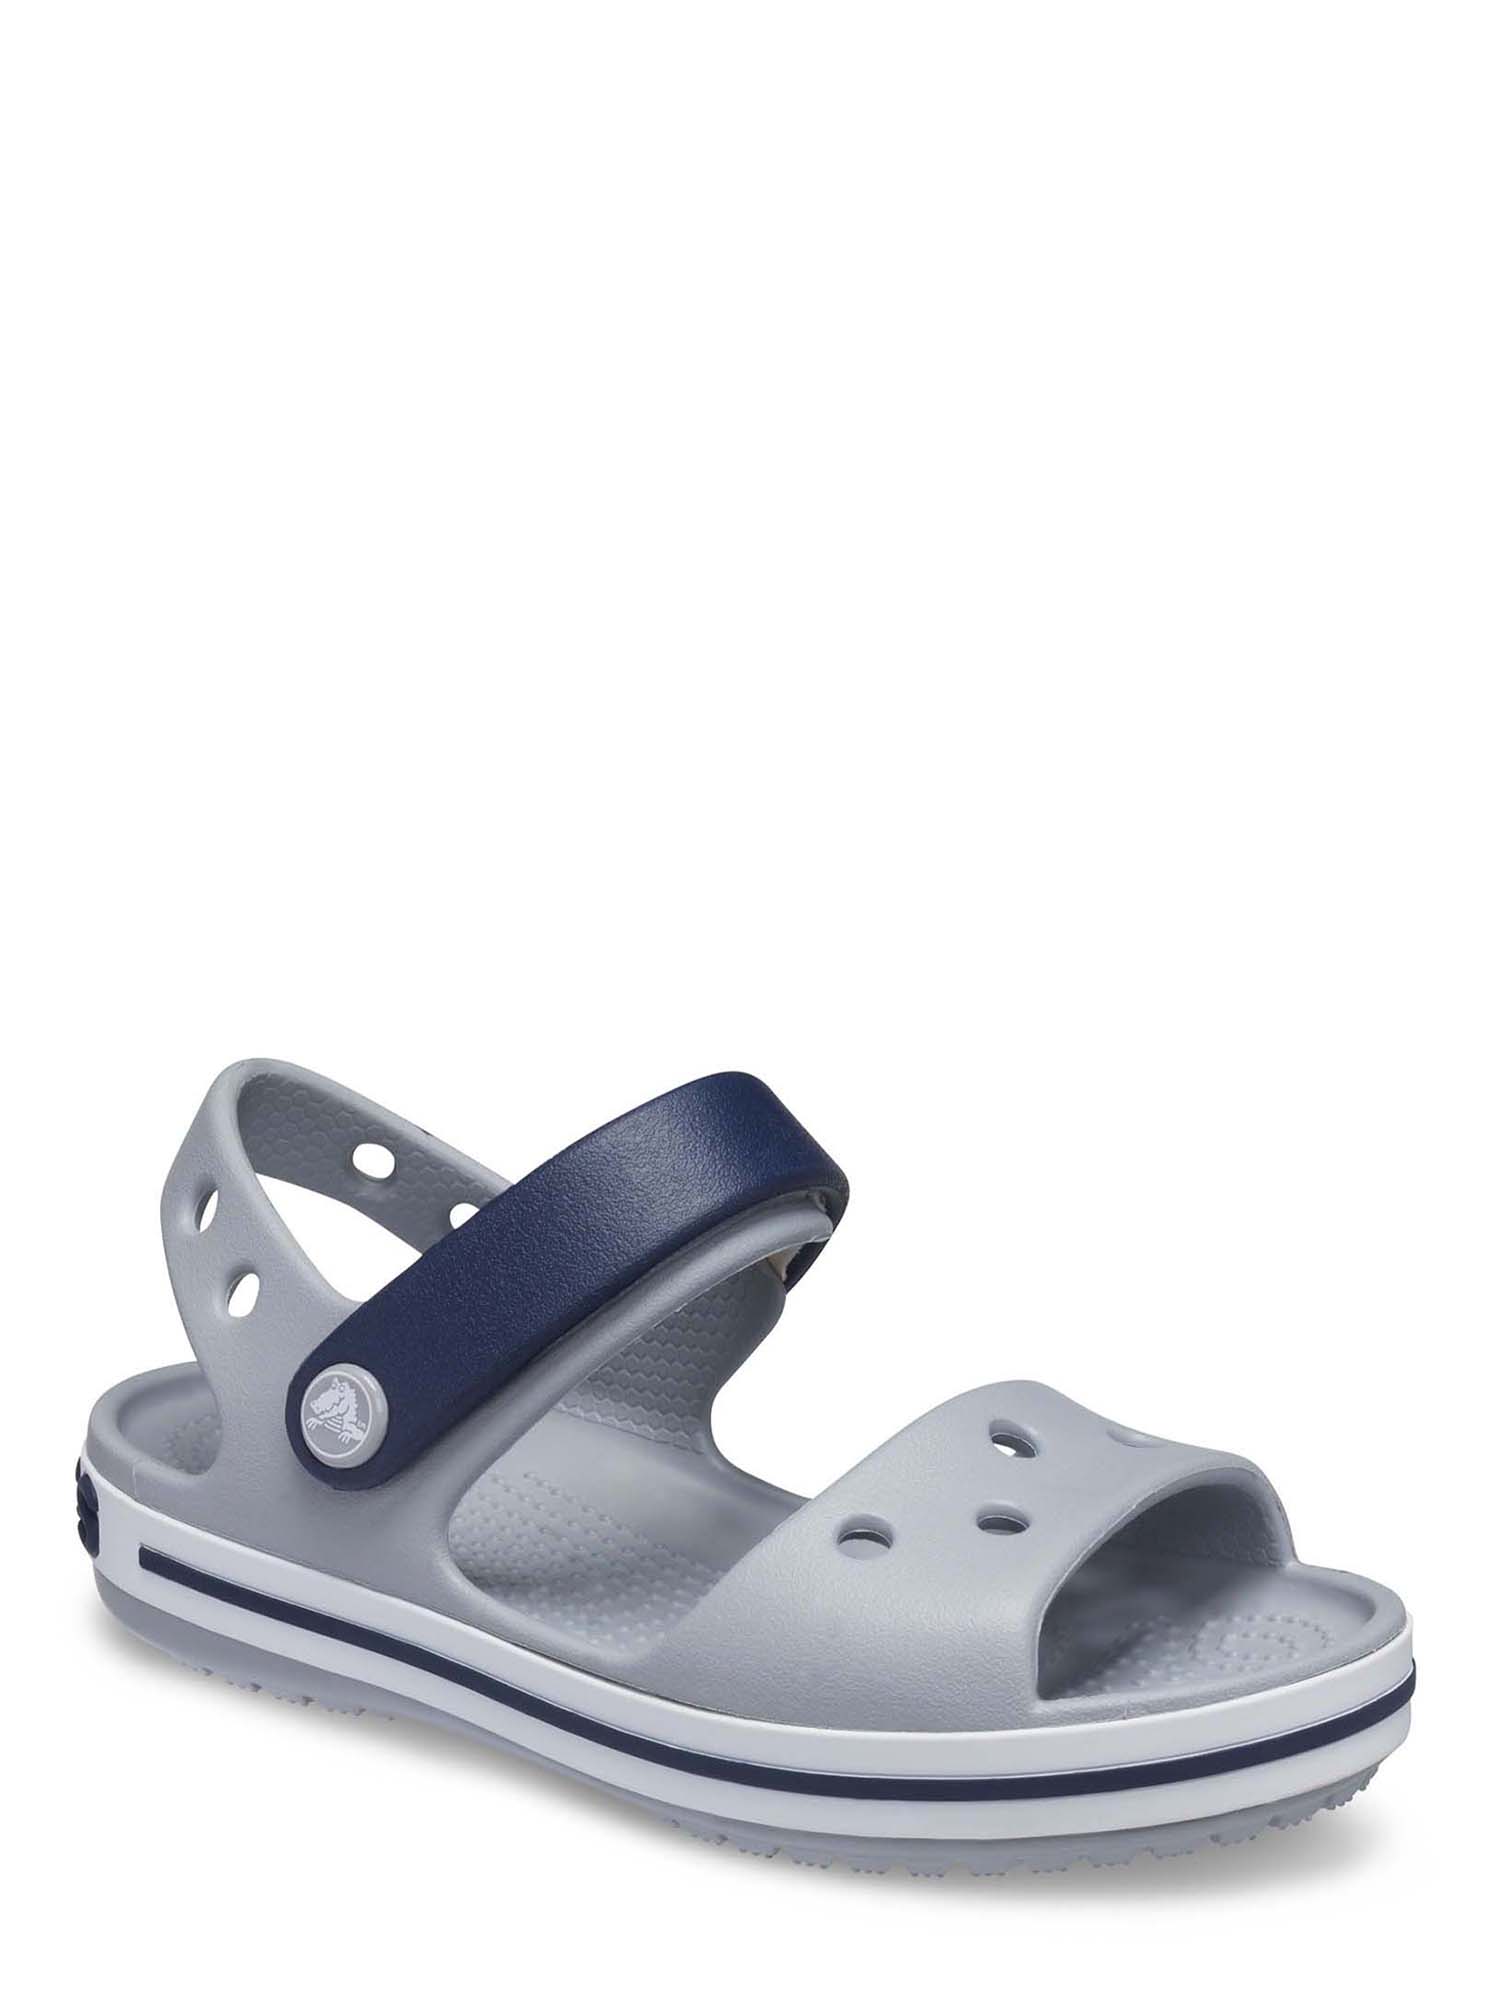 Crocs Toddler and Kids Crocband Cruiser Sandals, Sizes 4-3 - image 1 of 5